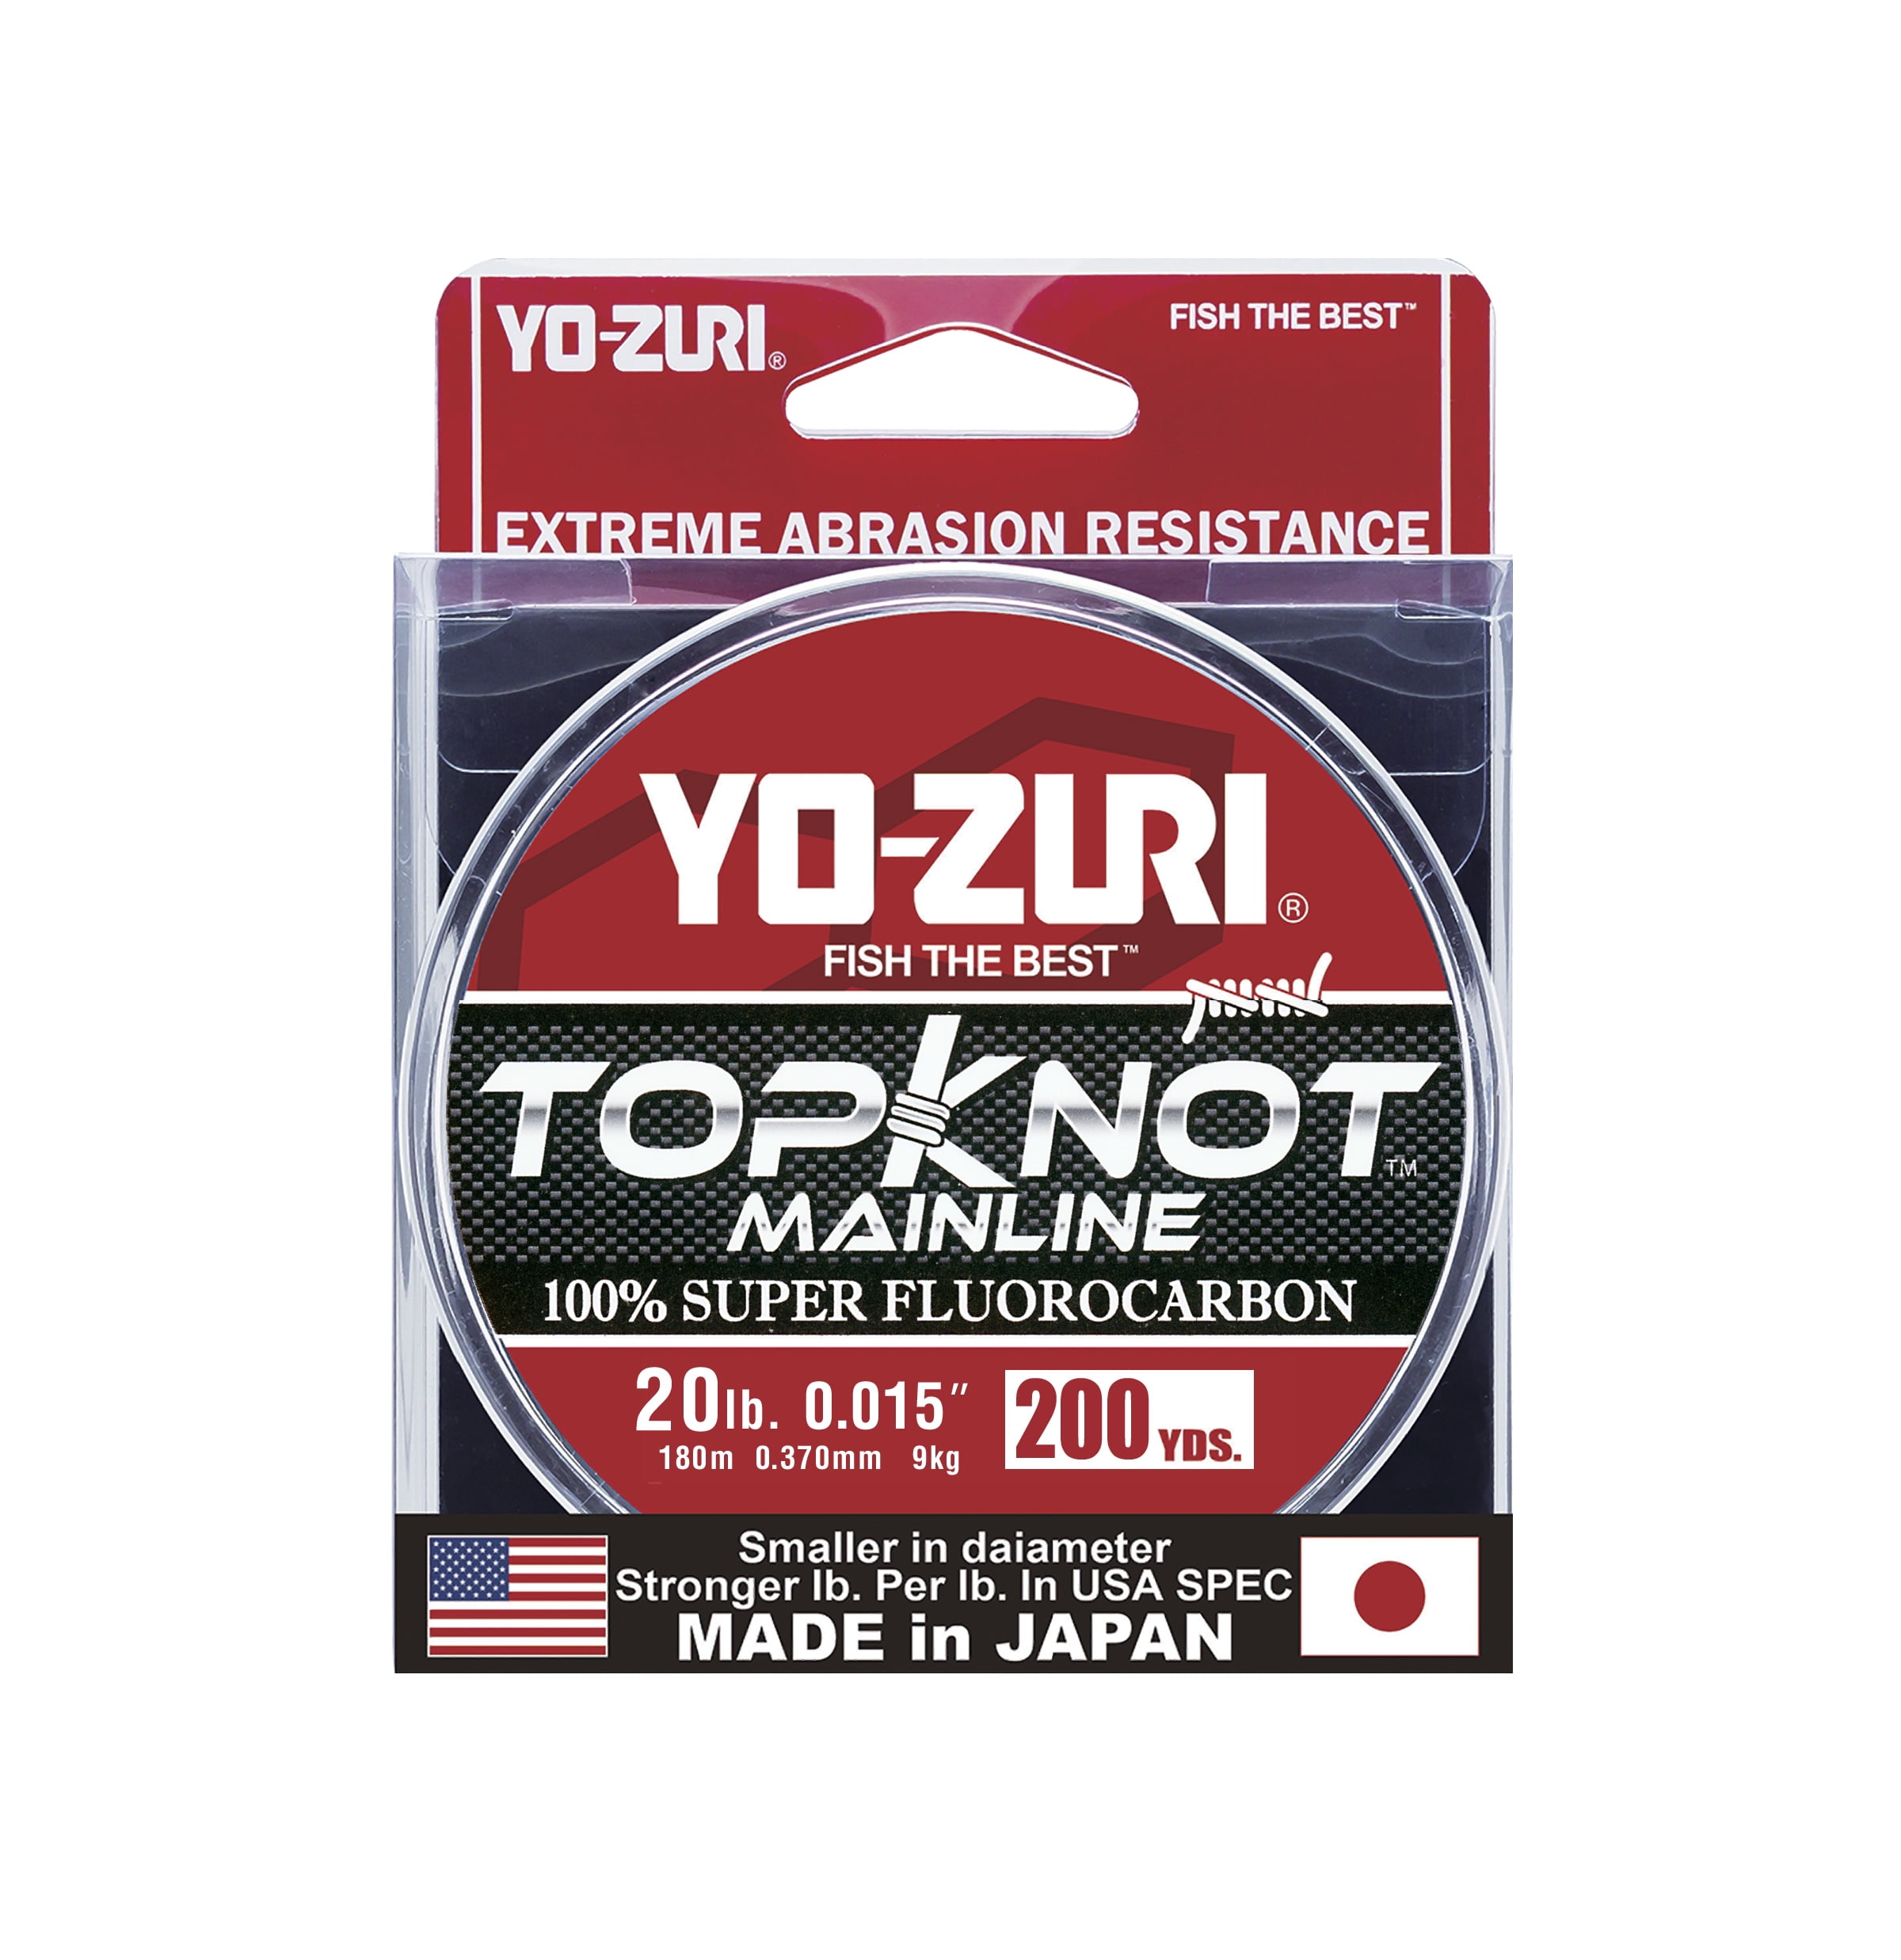 YO-ZURI HD Fluorocarbon Fishing Leader Line 30yds All Breaking Strains Available 